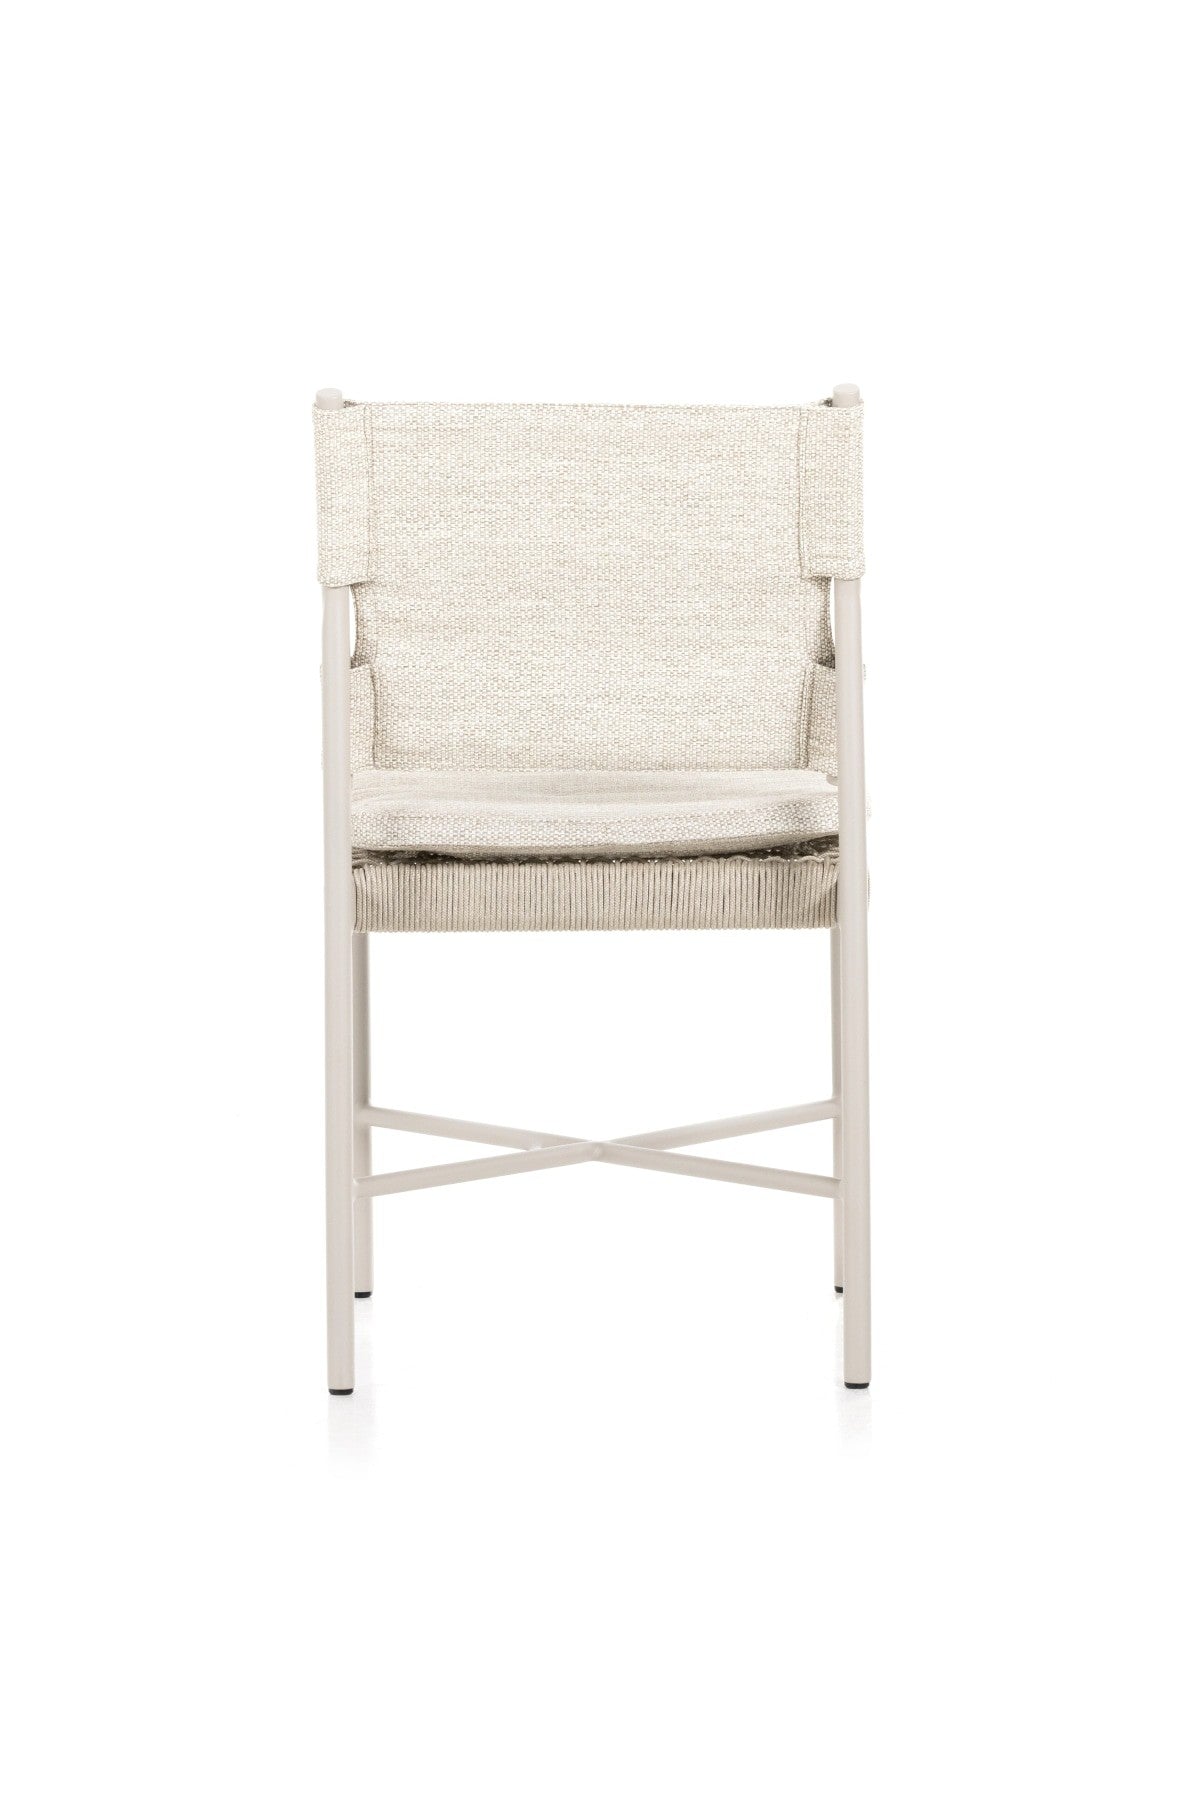 Portico Outdoor Dining Chair